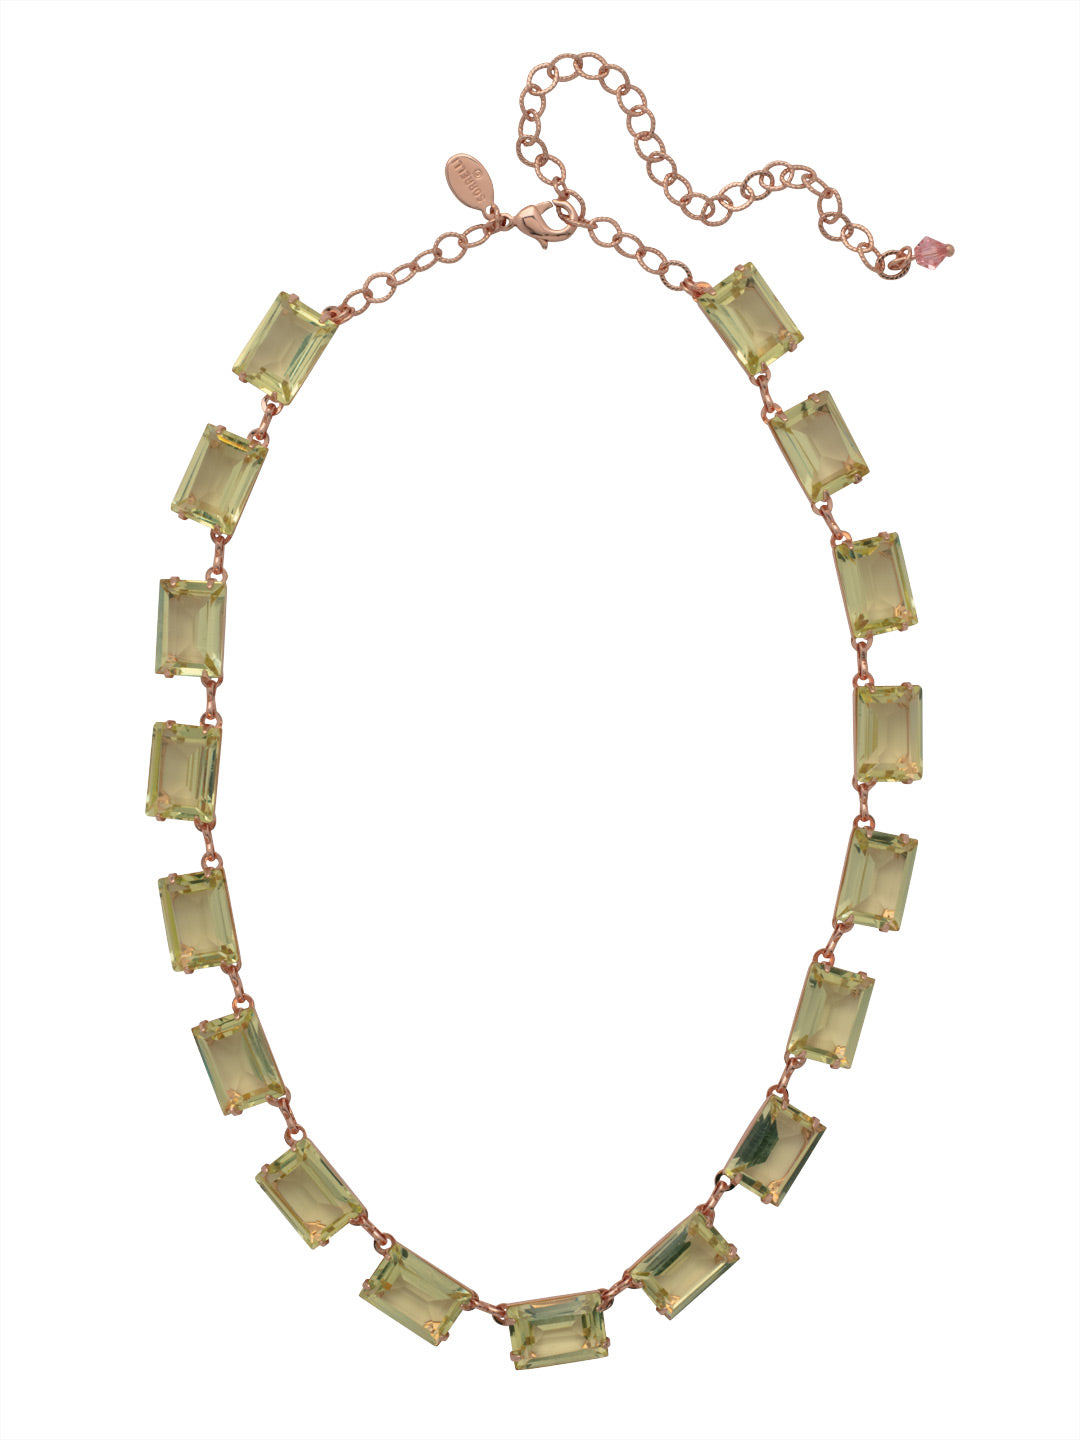 Julianna Mini Emerald Cut Statement Necklace - NFD78RGPPN - <p>The Julianna Mini Cut Statement Necklace features a row of emerald cut candy drop crystals around an adjustable chain, secured with a lobster claw clasp. From Sorrelli's Pink Pineapple collection in our Rose Gold-tone finish.</p>